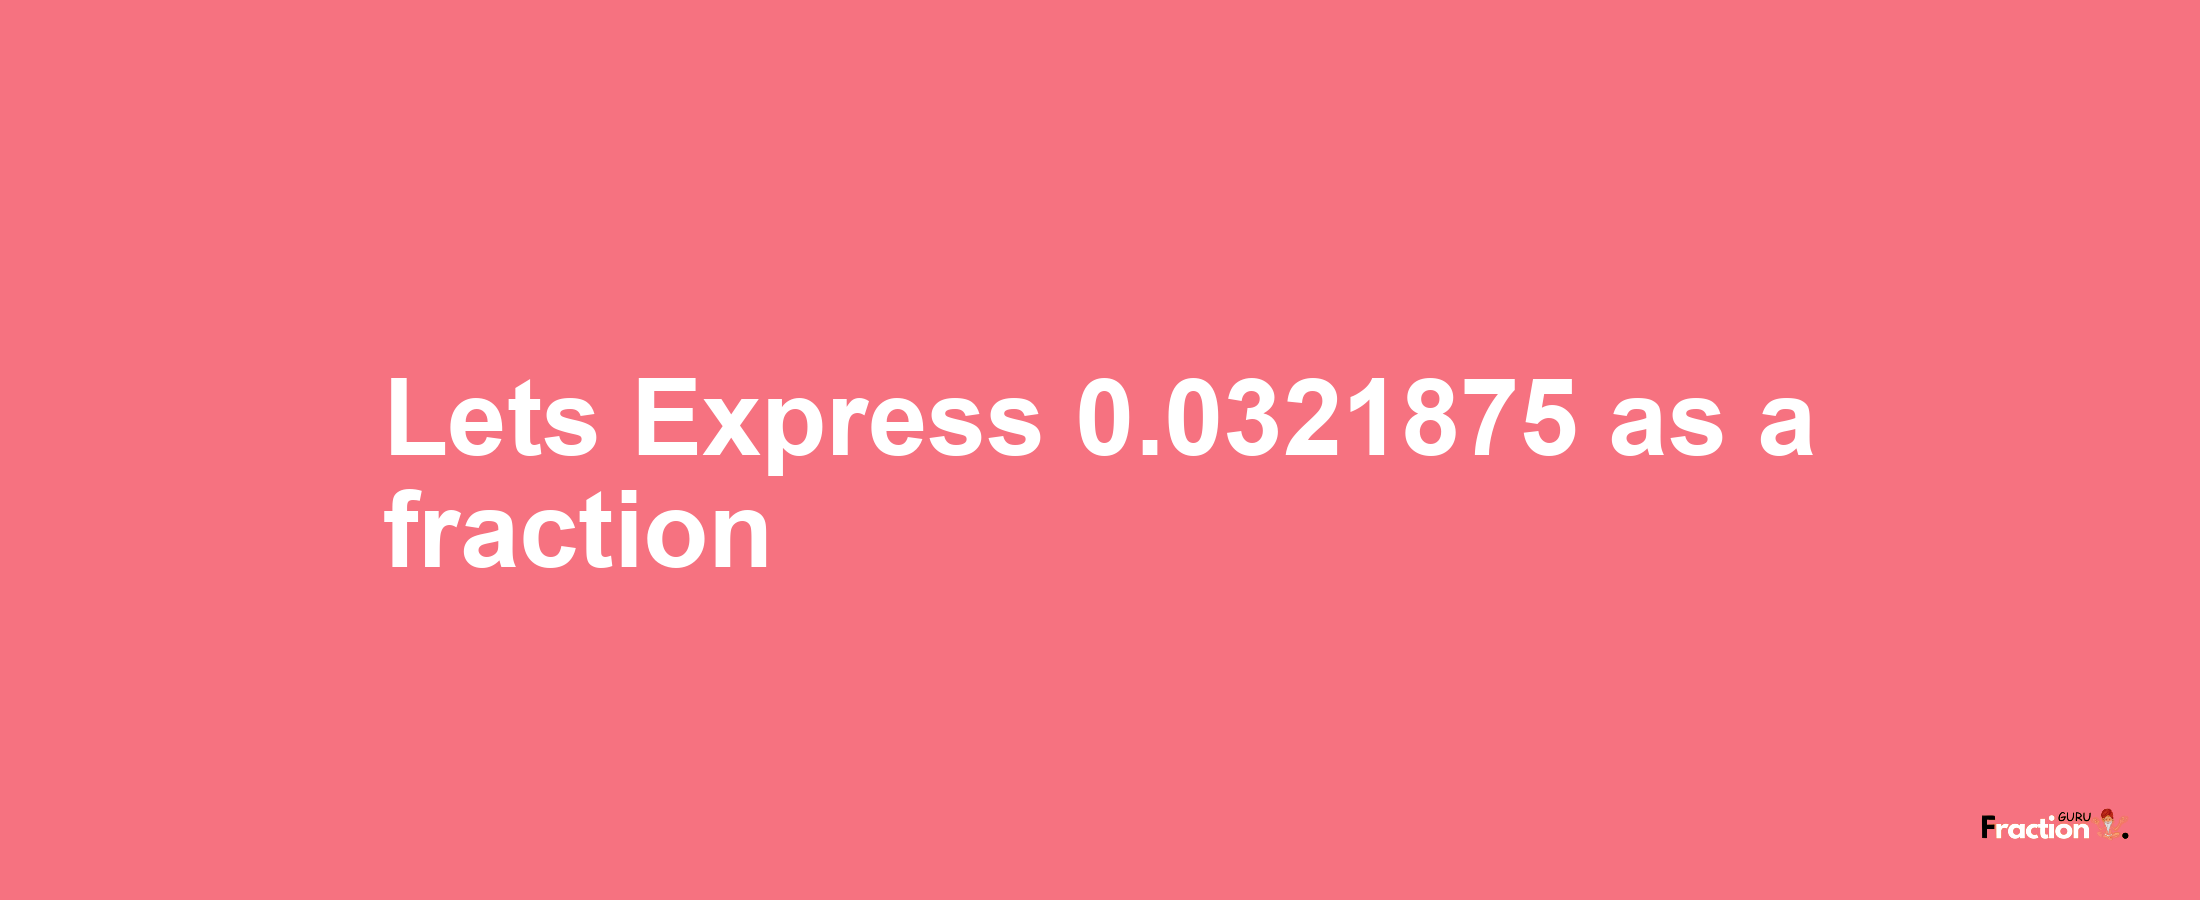 Lets Express 0.0321875 as afraction